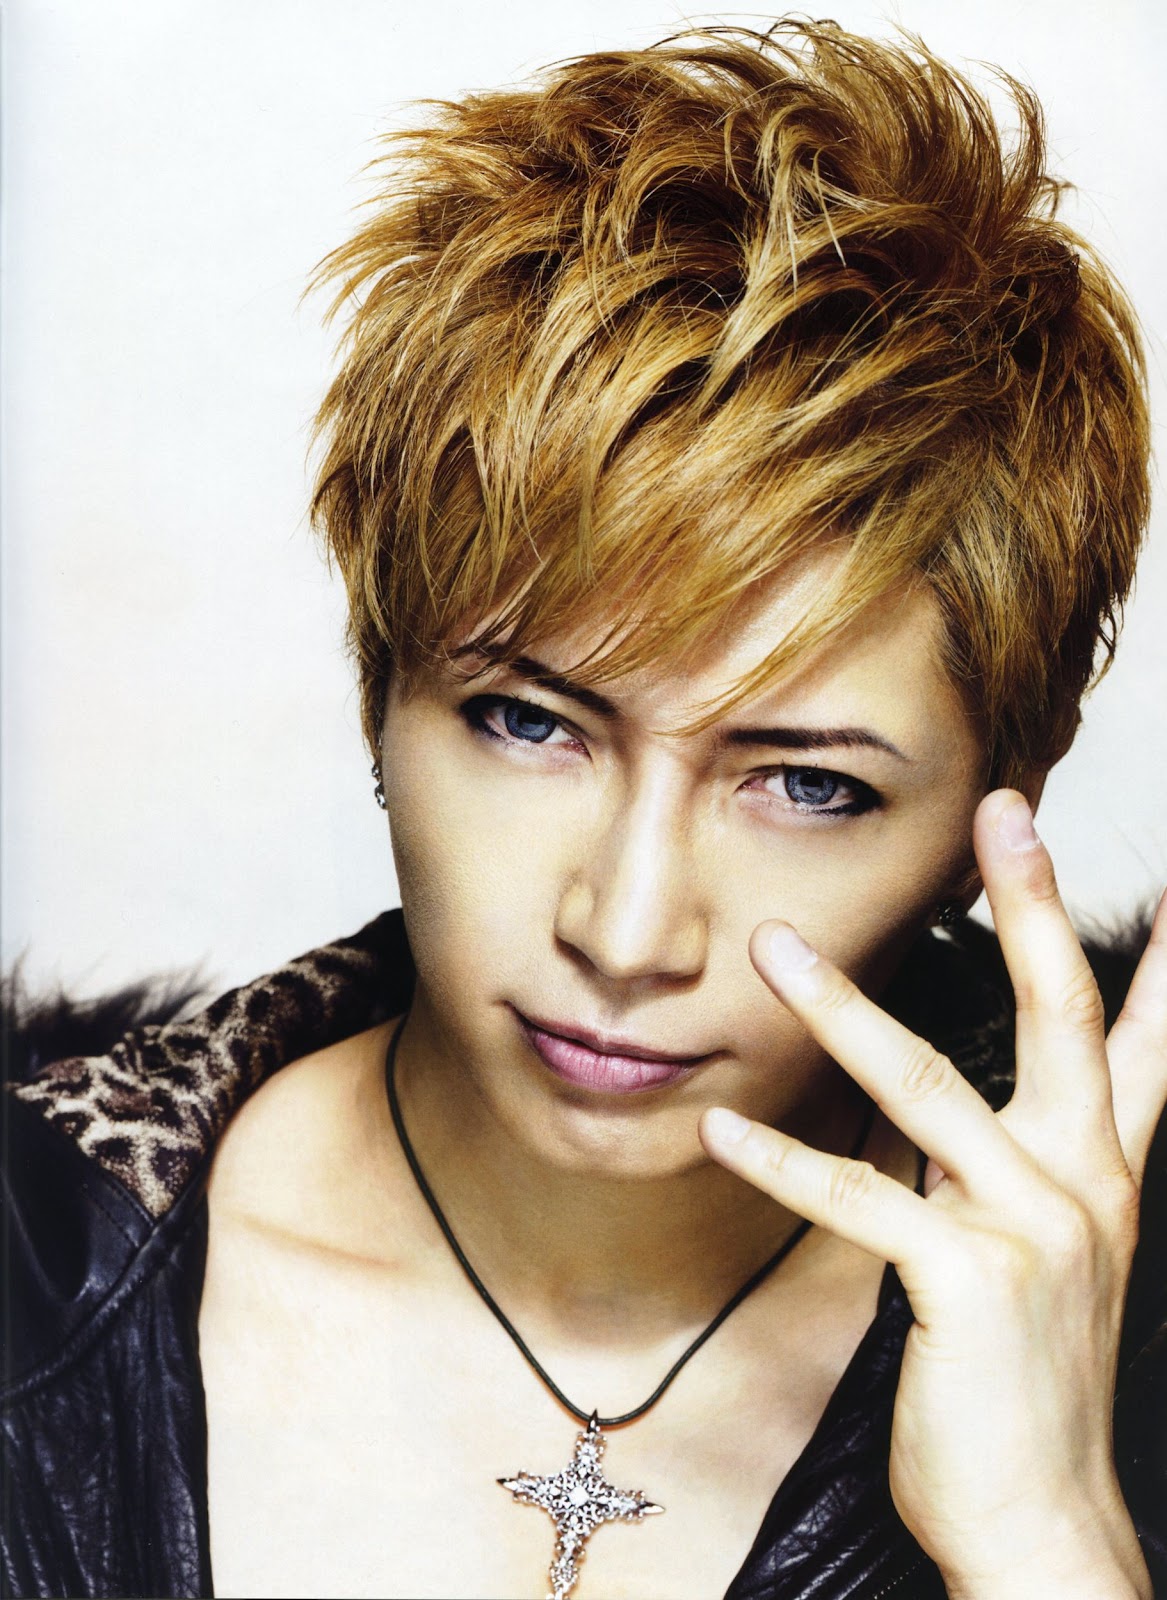 Microsound Fm Gackt S Secrets Unveiled By The Tax Evasion Investigation Show Your Heart Charity A Fraud